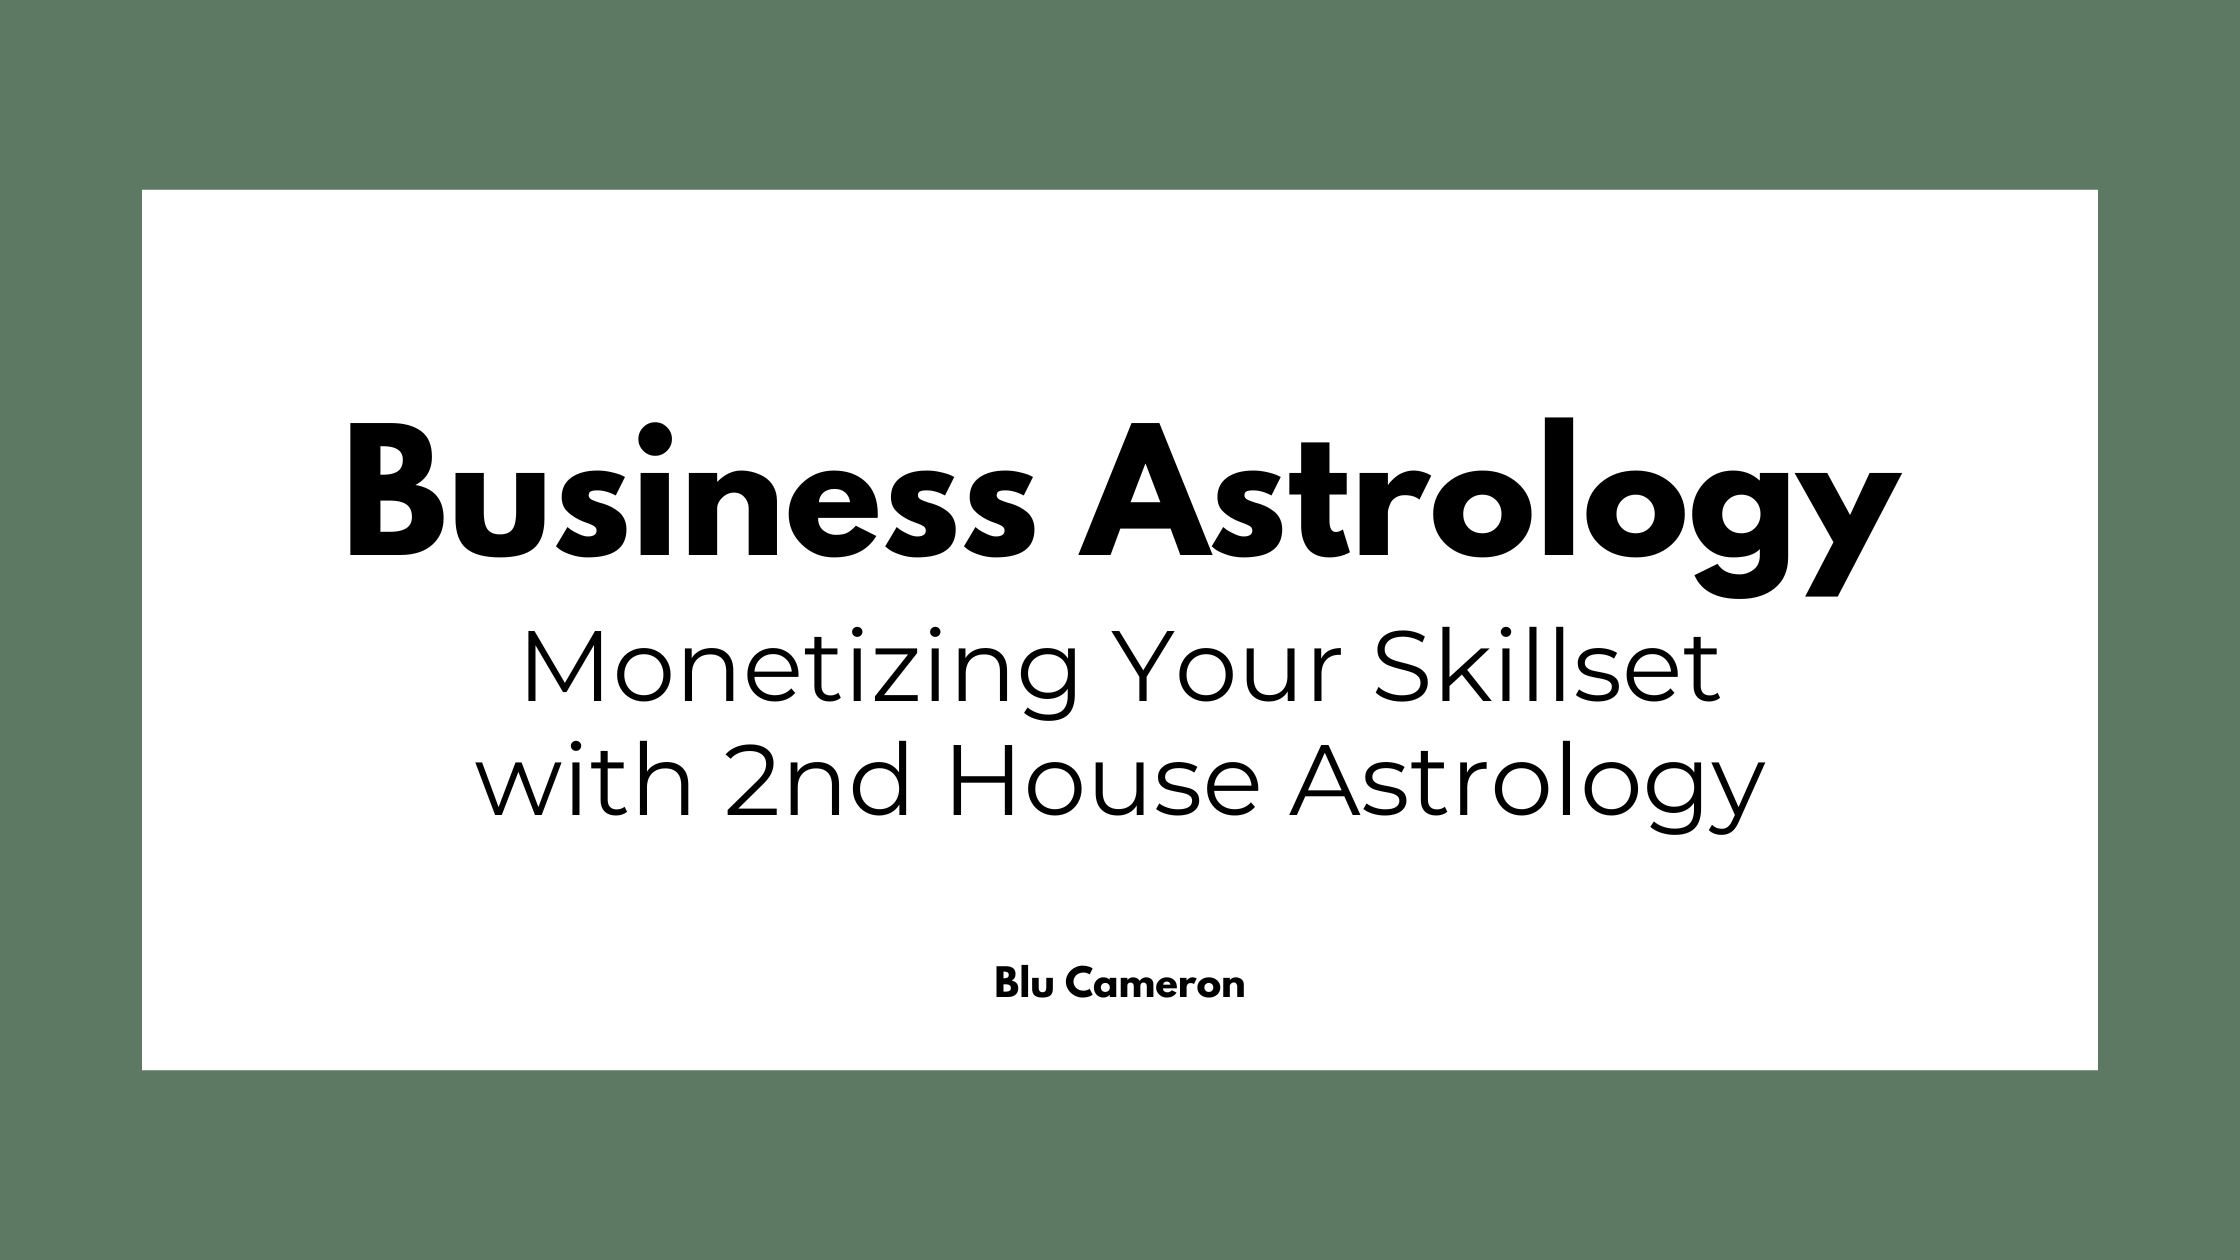 Black text against a white and green background reads: "Business Astrology, Monetizing Your Skillset with 2nd House Astrology"